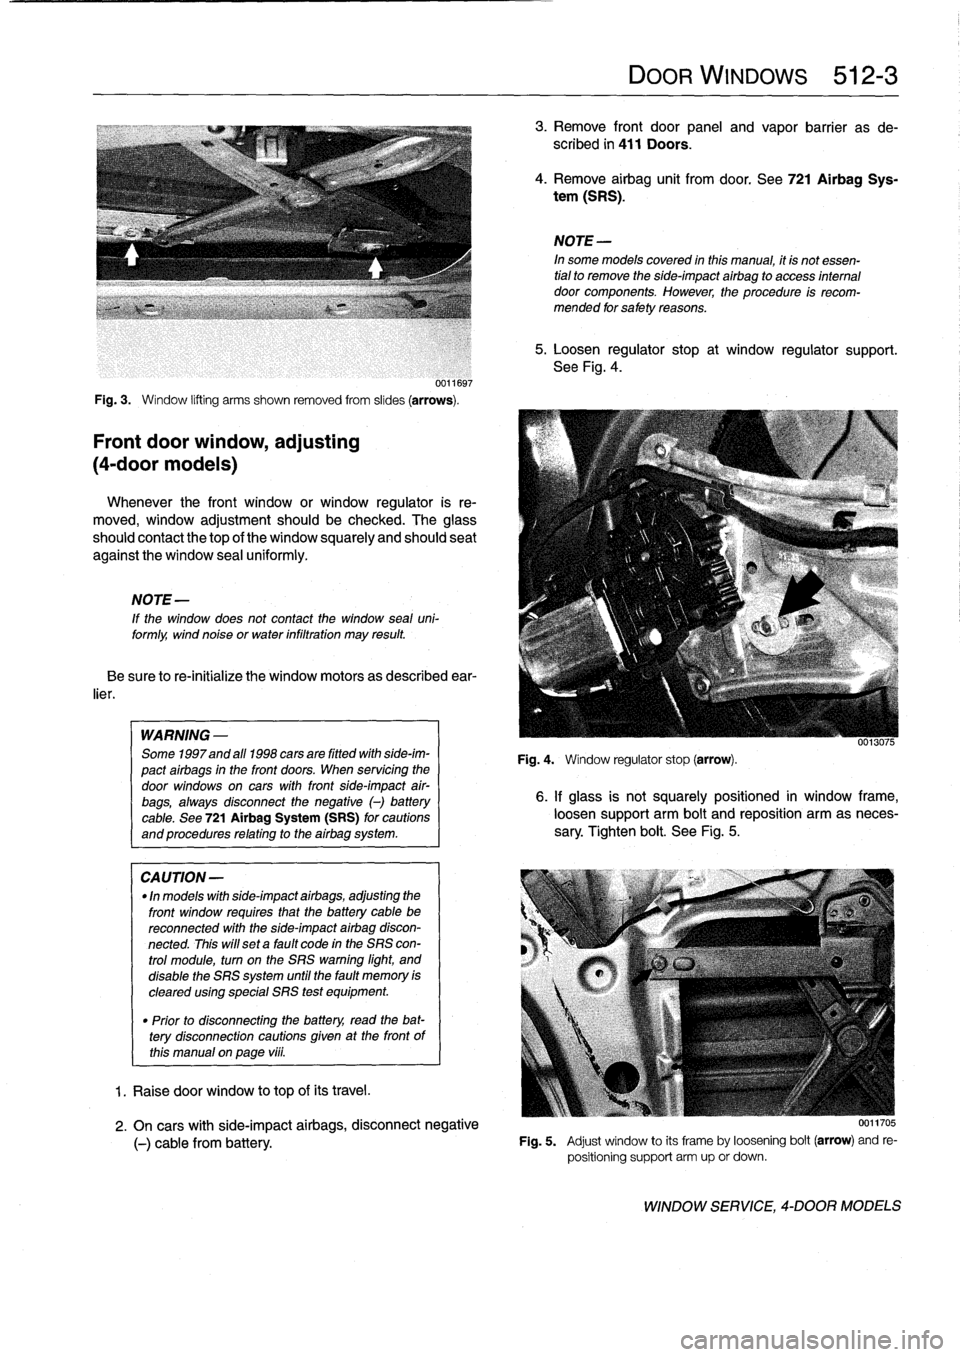 BMW 325i 1994 E36 Workshop Manual 
0011697

Fig
.
3
.

	

Window
lifting
arms
shown
removed
from
slides
(arrows)
.

Front
door
window,
adjusting

(4-door
models)

Whenever
the
front
window
or
window
regulator
is
re-

moved,
window
adj